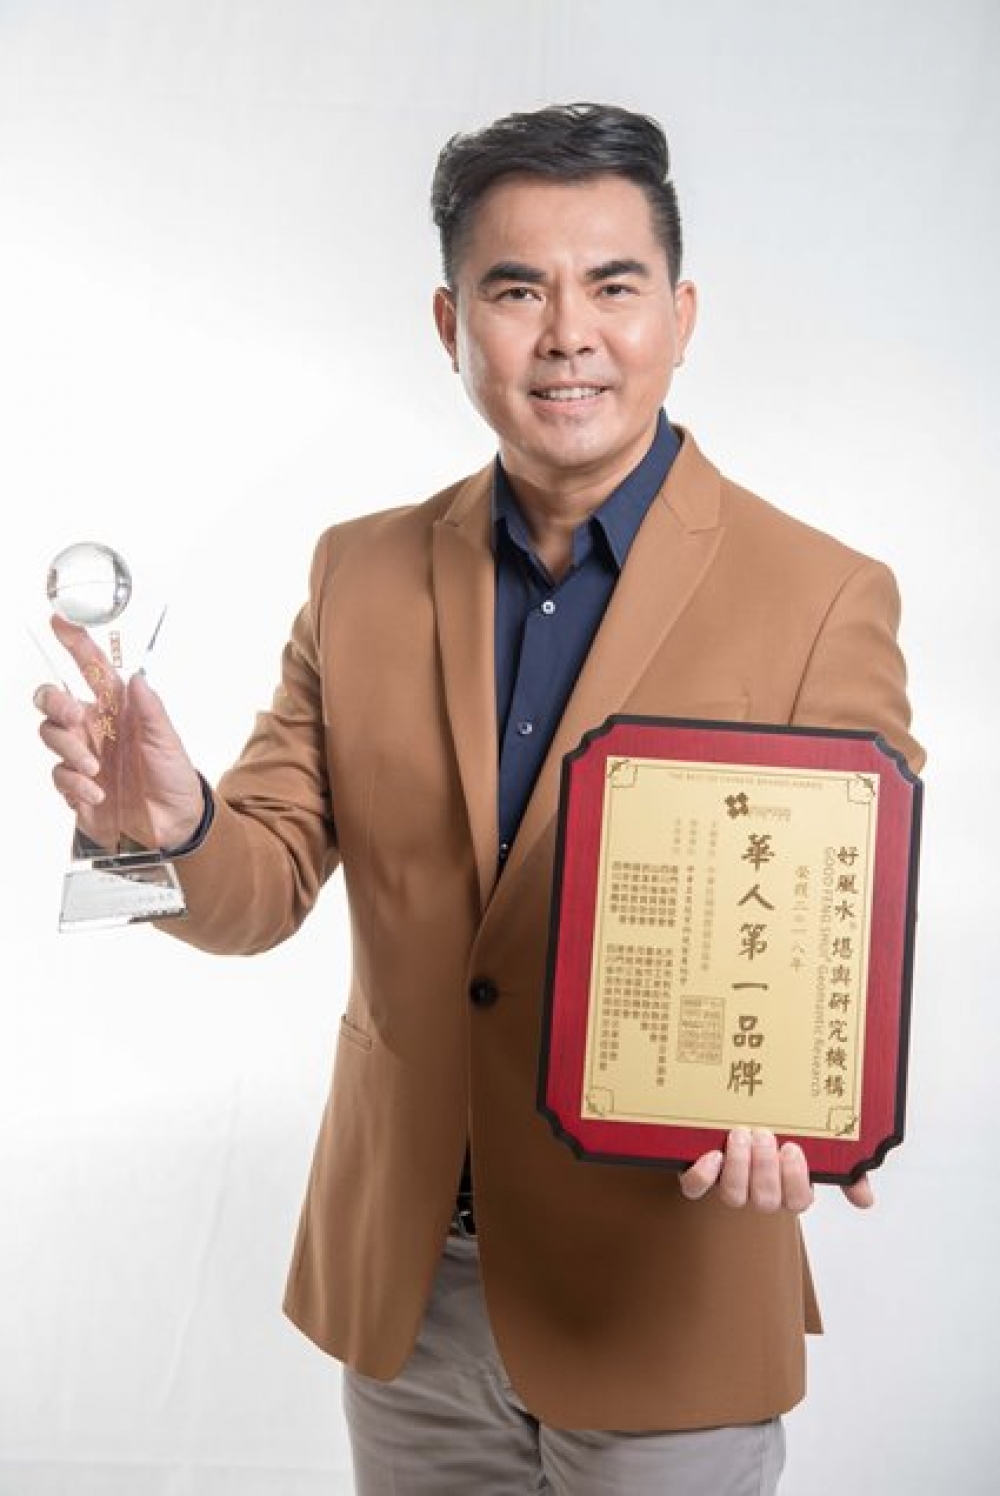 GOOD FENG SHUI: The Best Chinese Brands Award